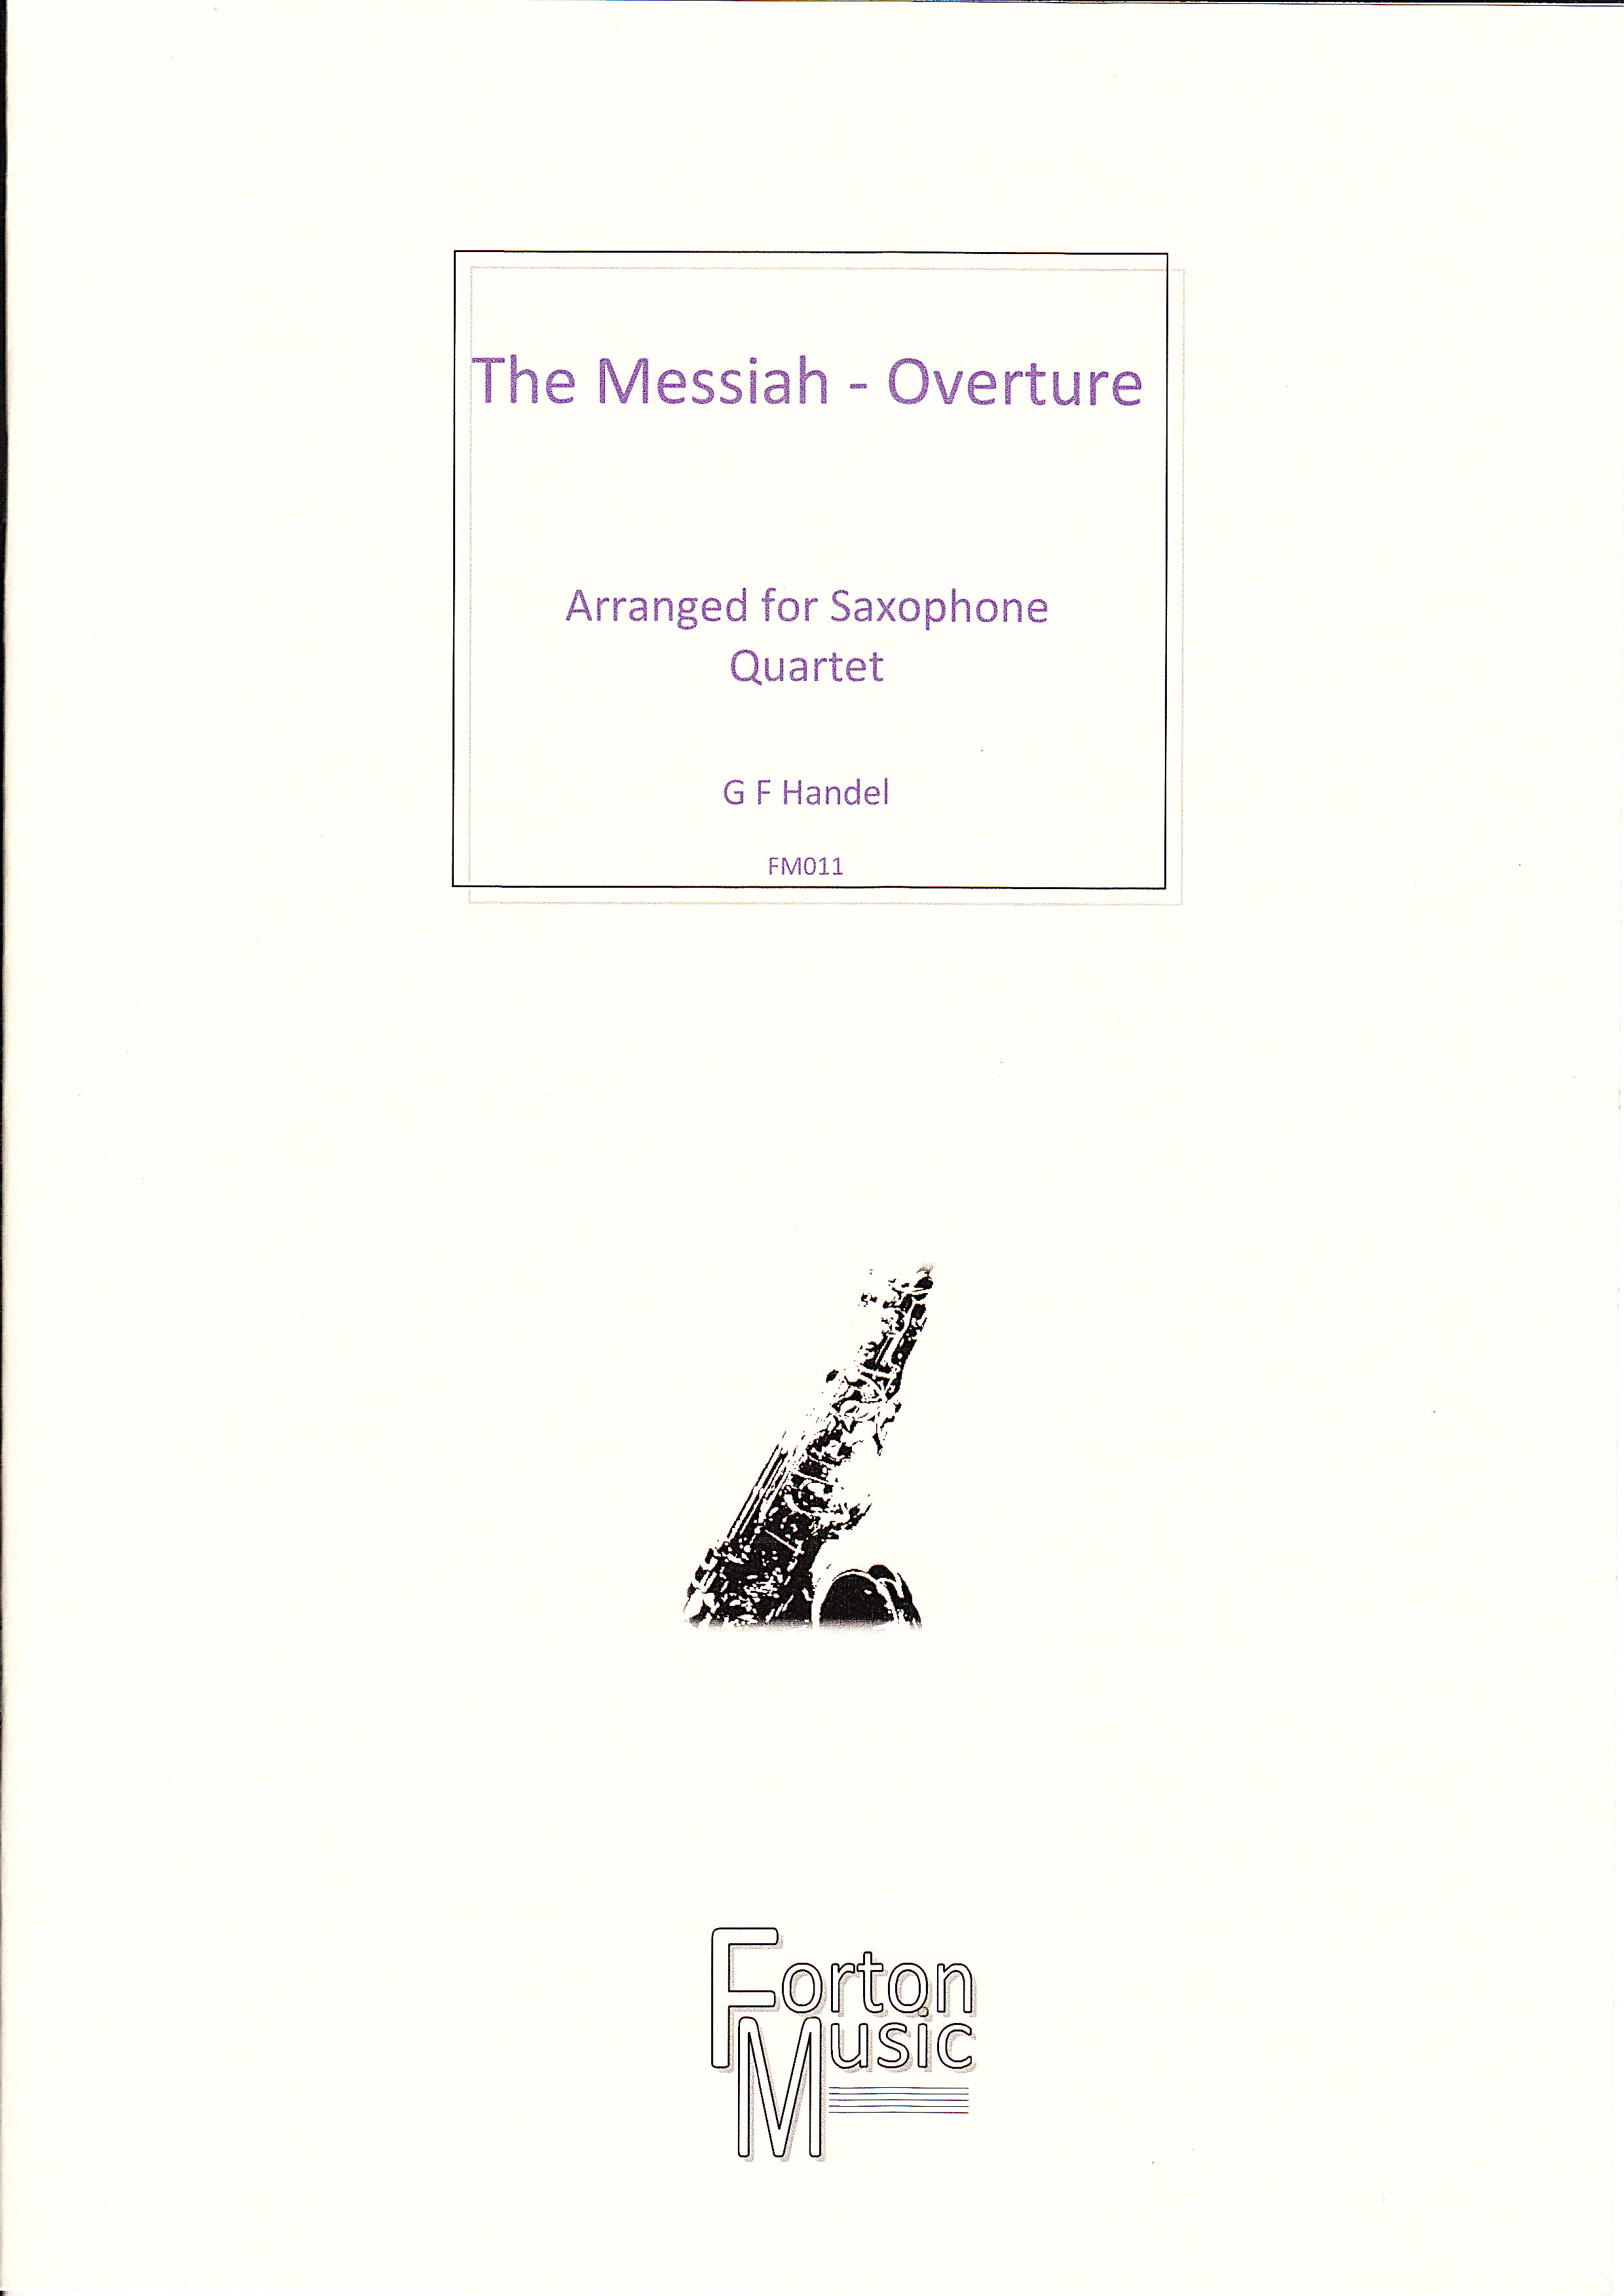 OVERTURE from The Messiah